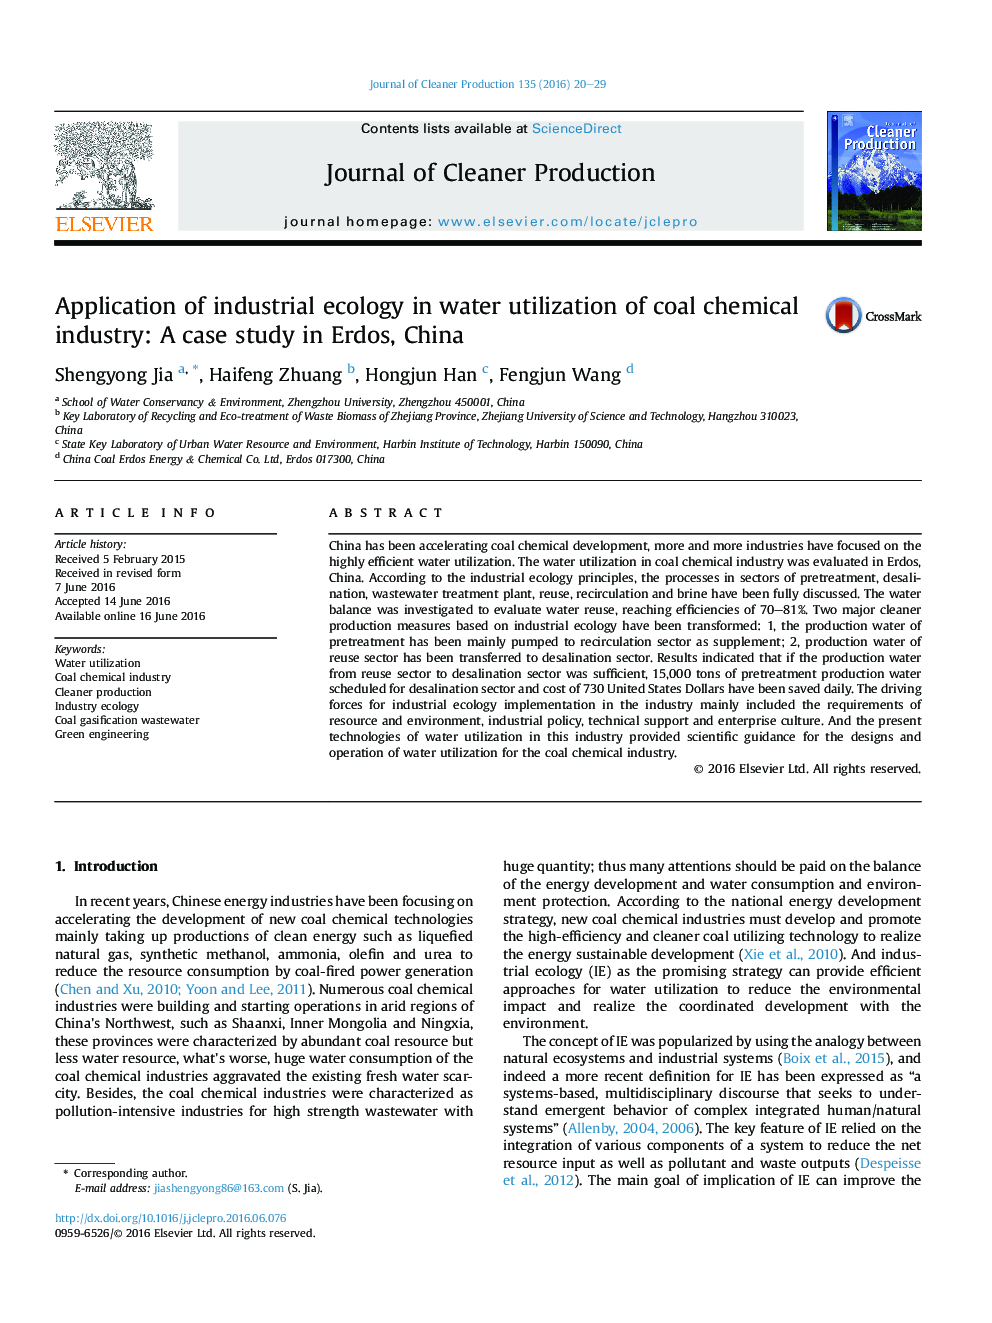 Application of industrial ecology in water utilization of coal chemical industry: A case study in Erdos, China